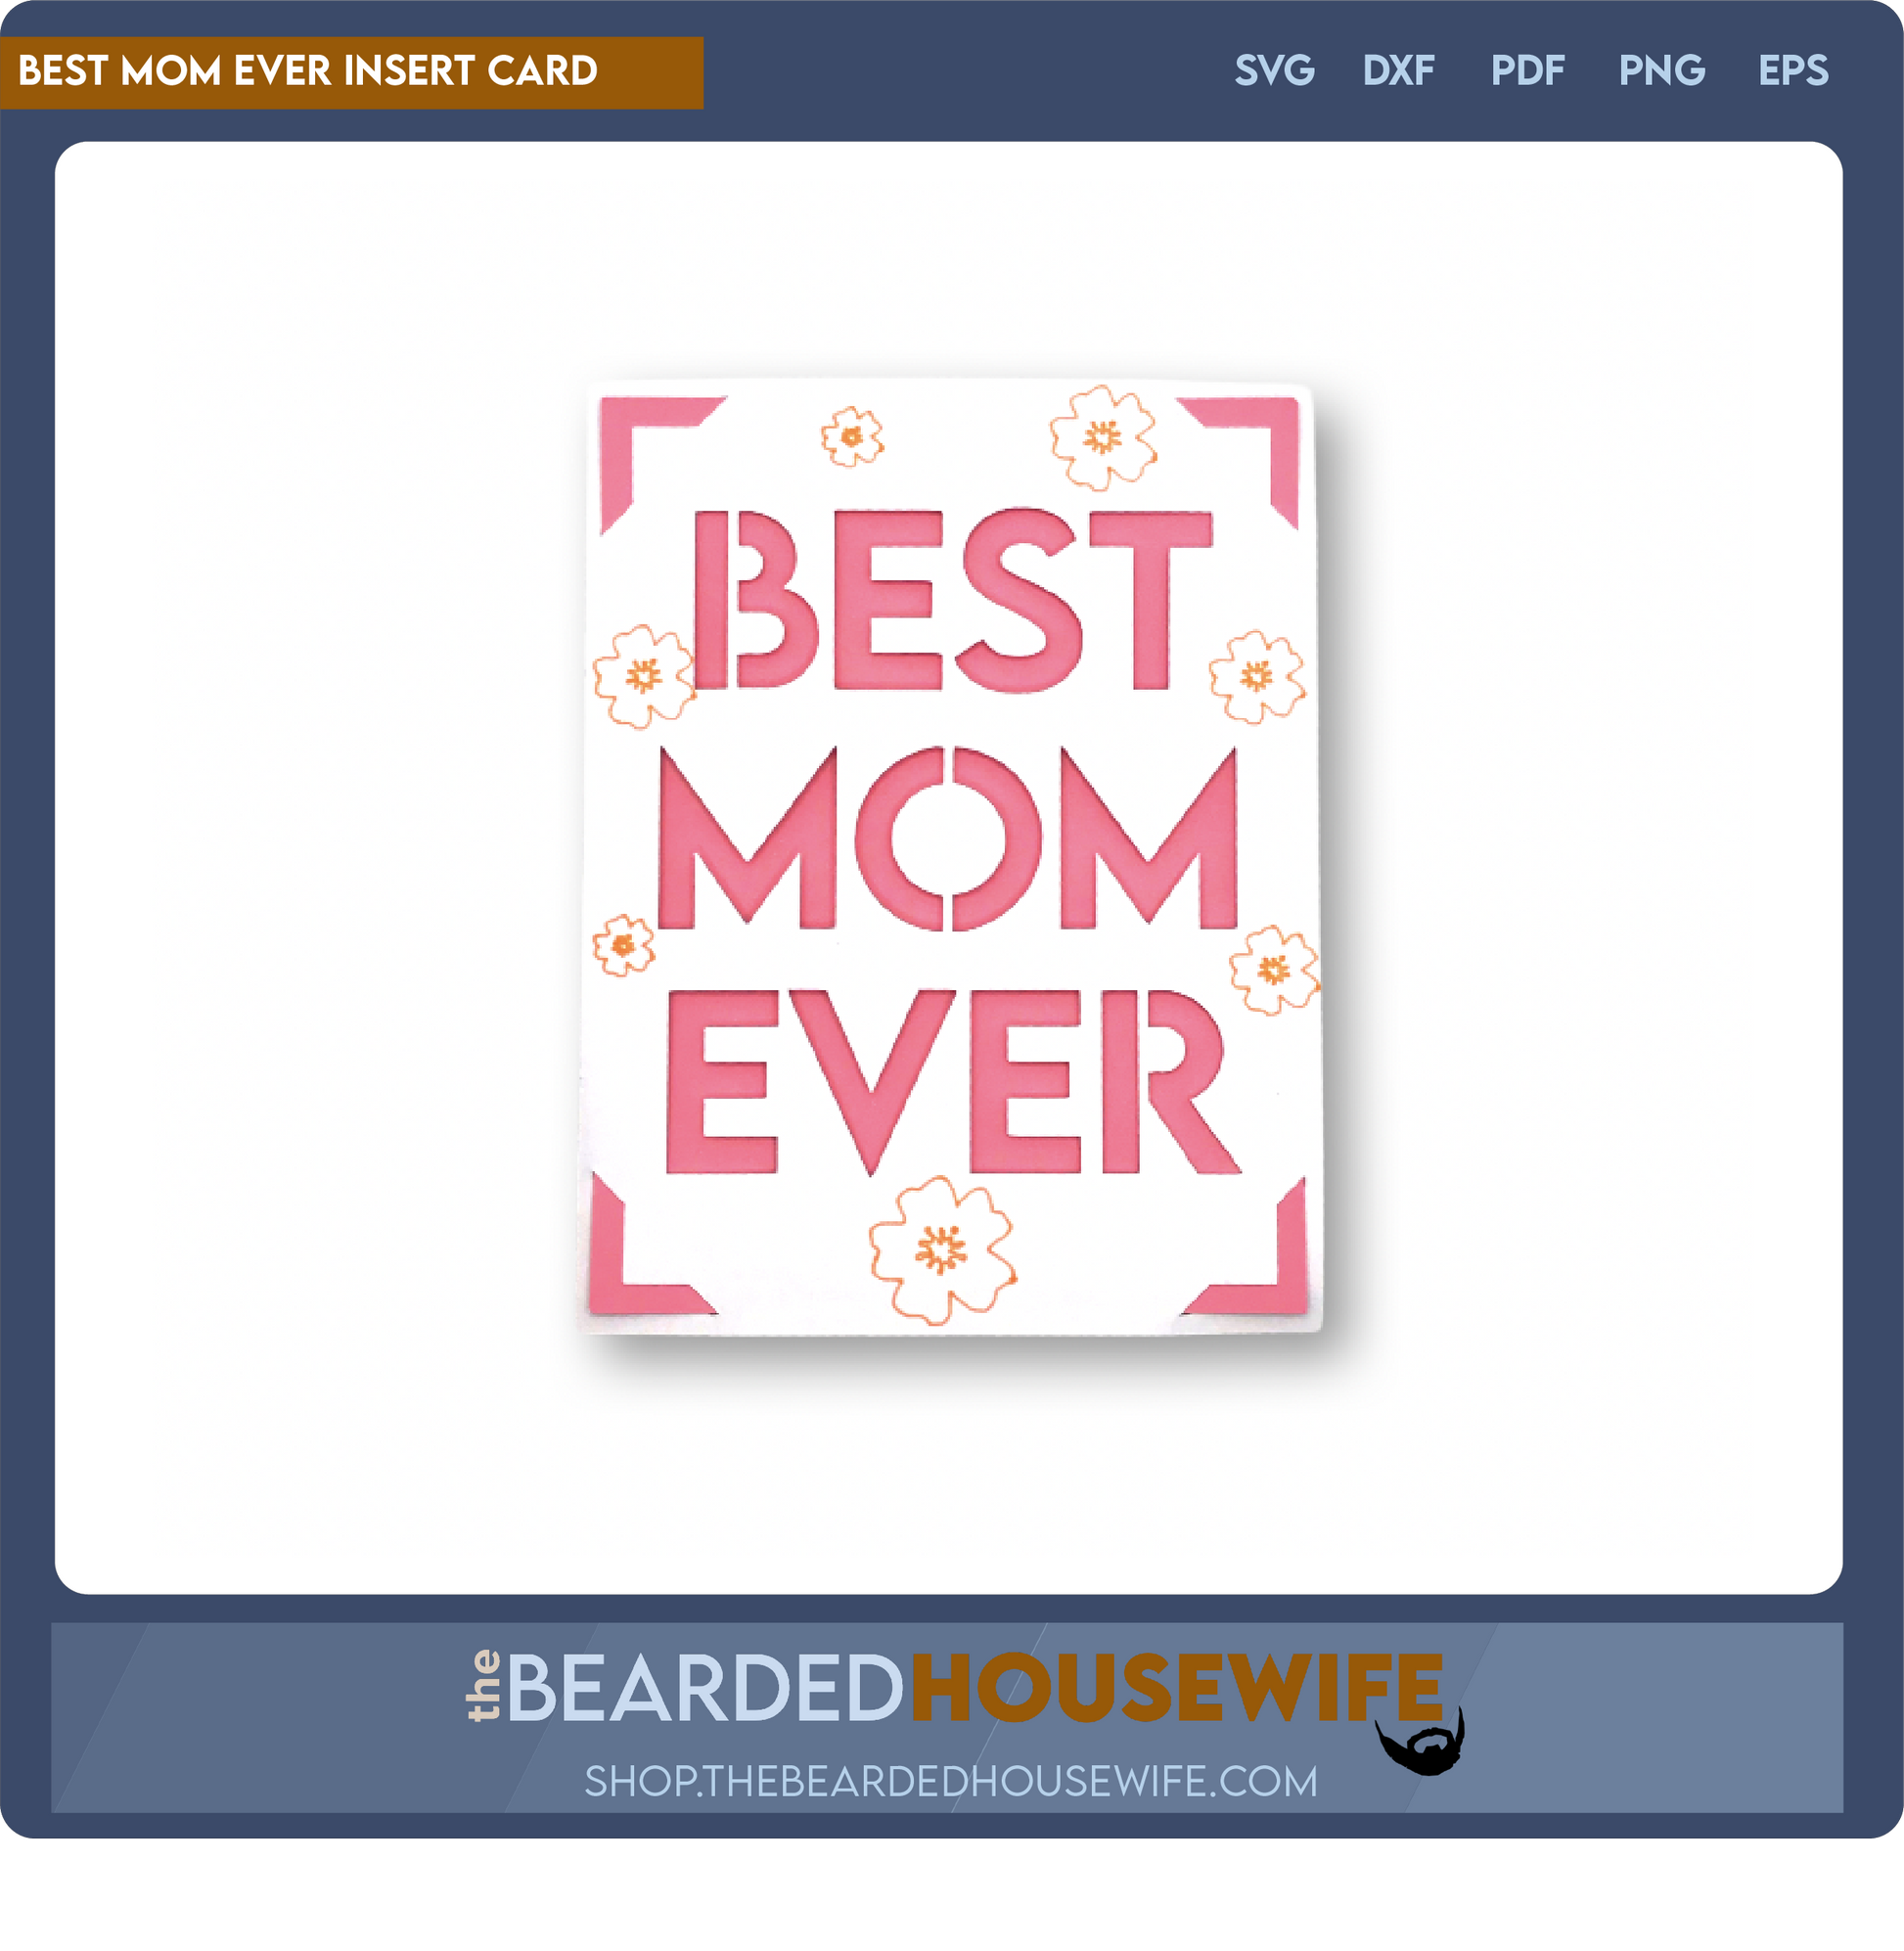 best mom ever insert card - the bearded housewife